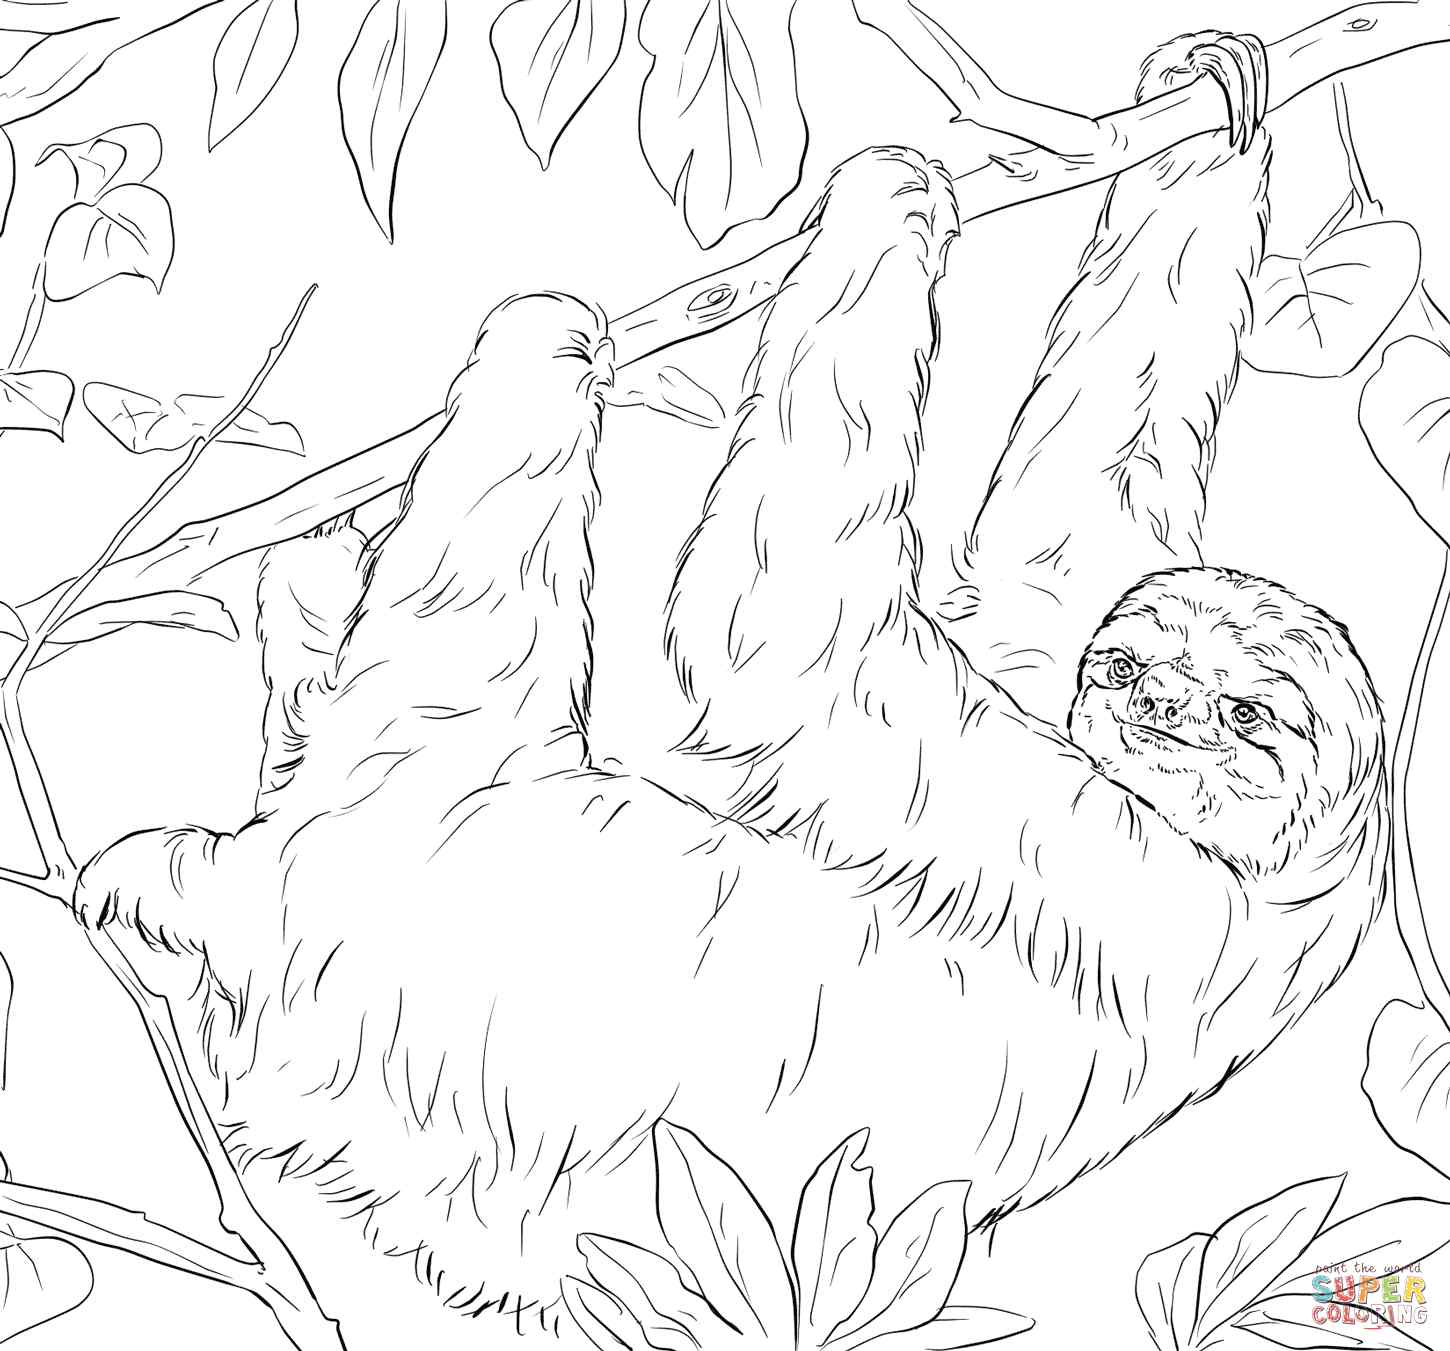 Sloth Coloring Page